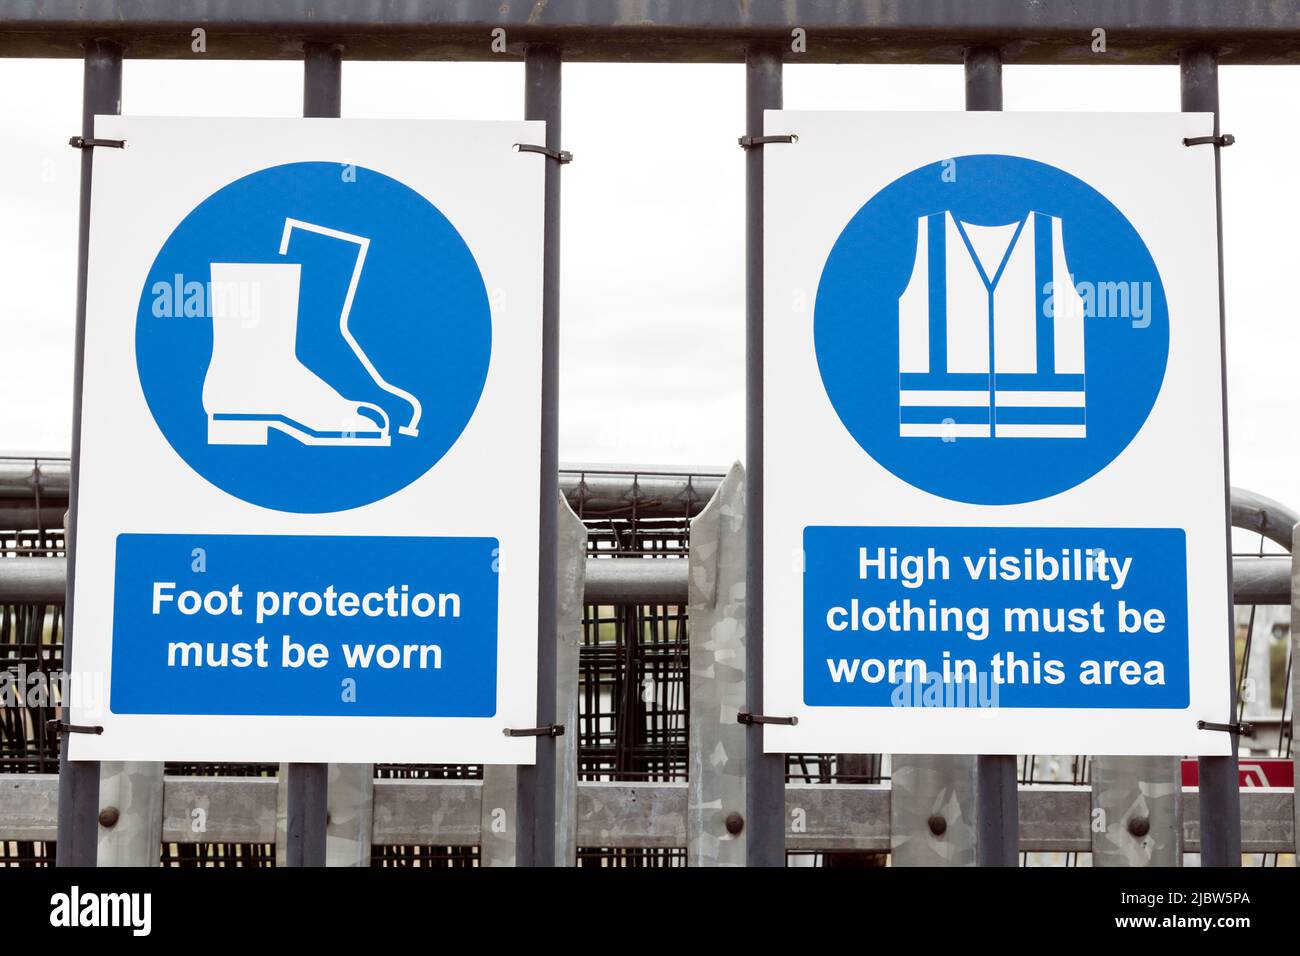 Foot Protection and High Visibility Clothing Must Be Worn In This Area Health And Safety Notices at the entrance to a workplace, UK Stock Photo